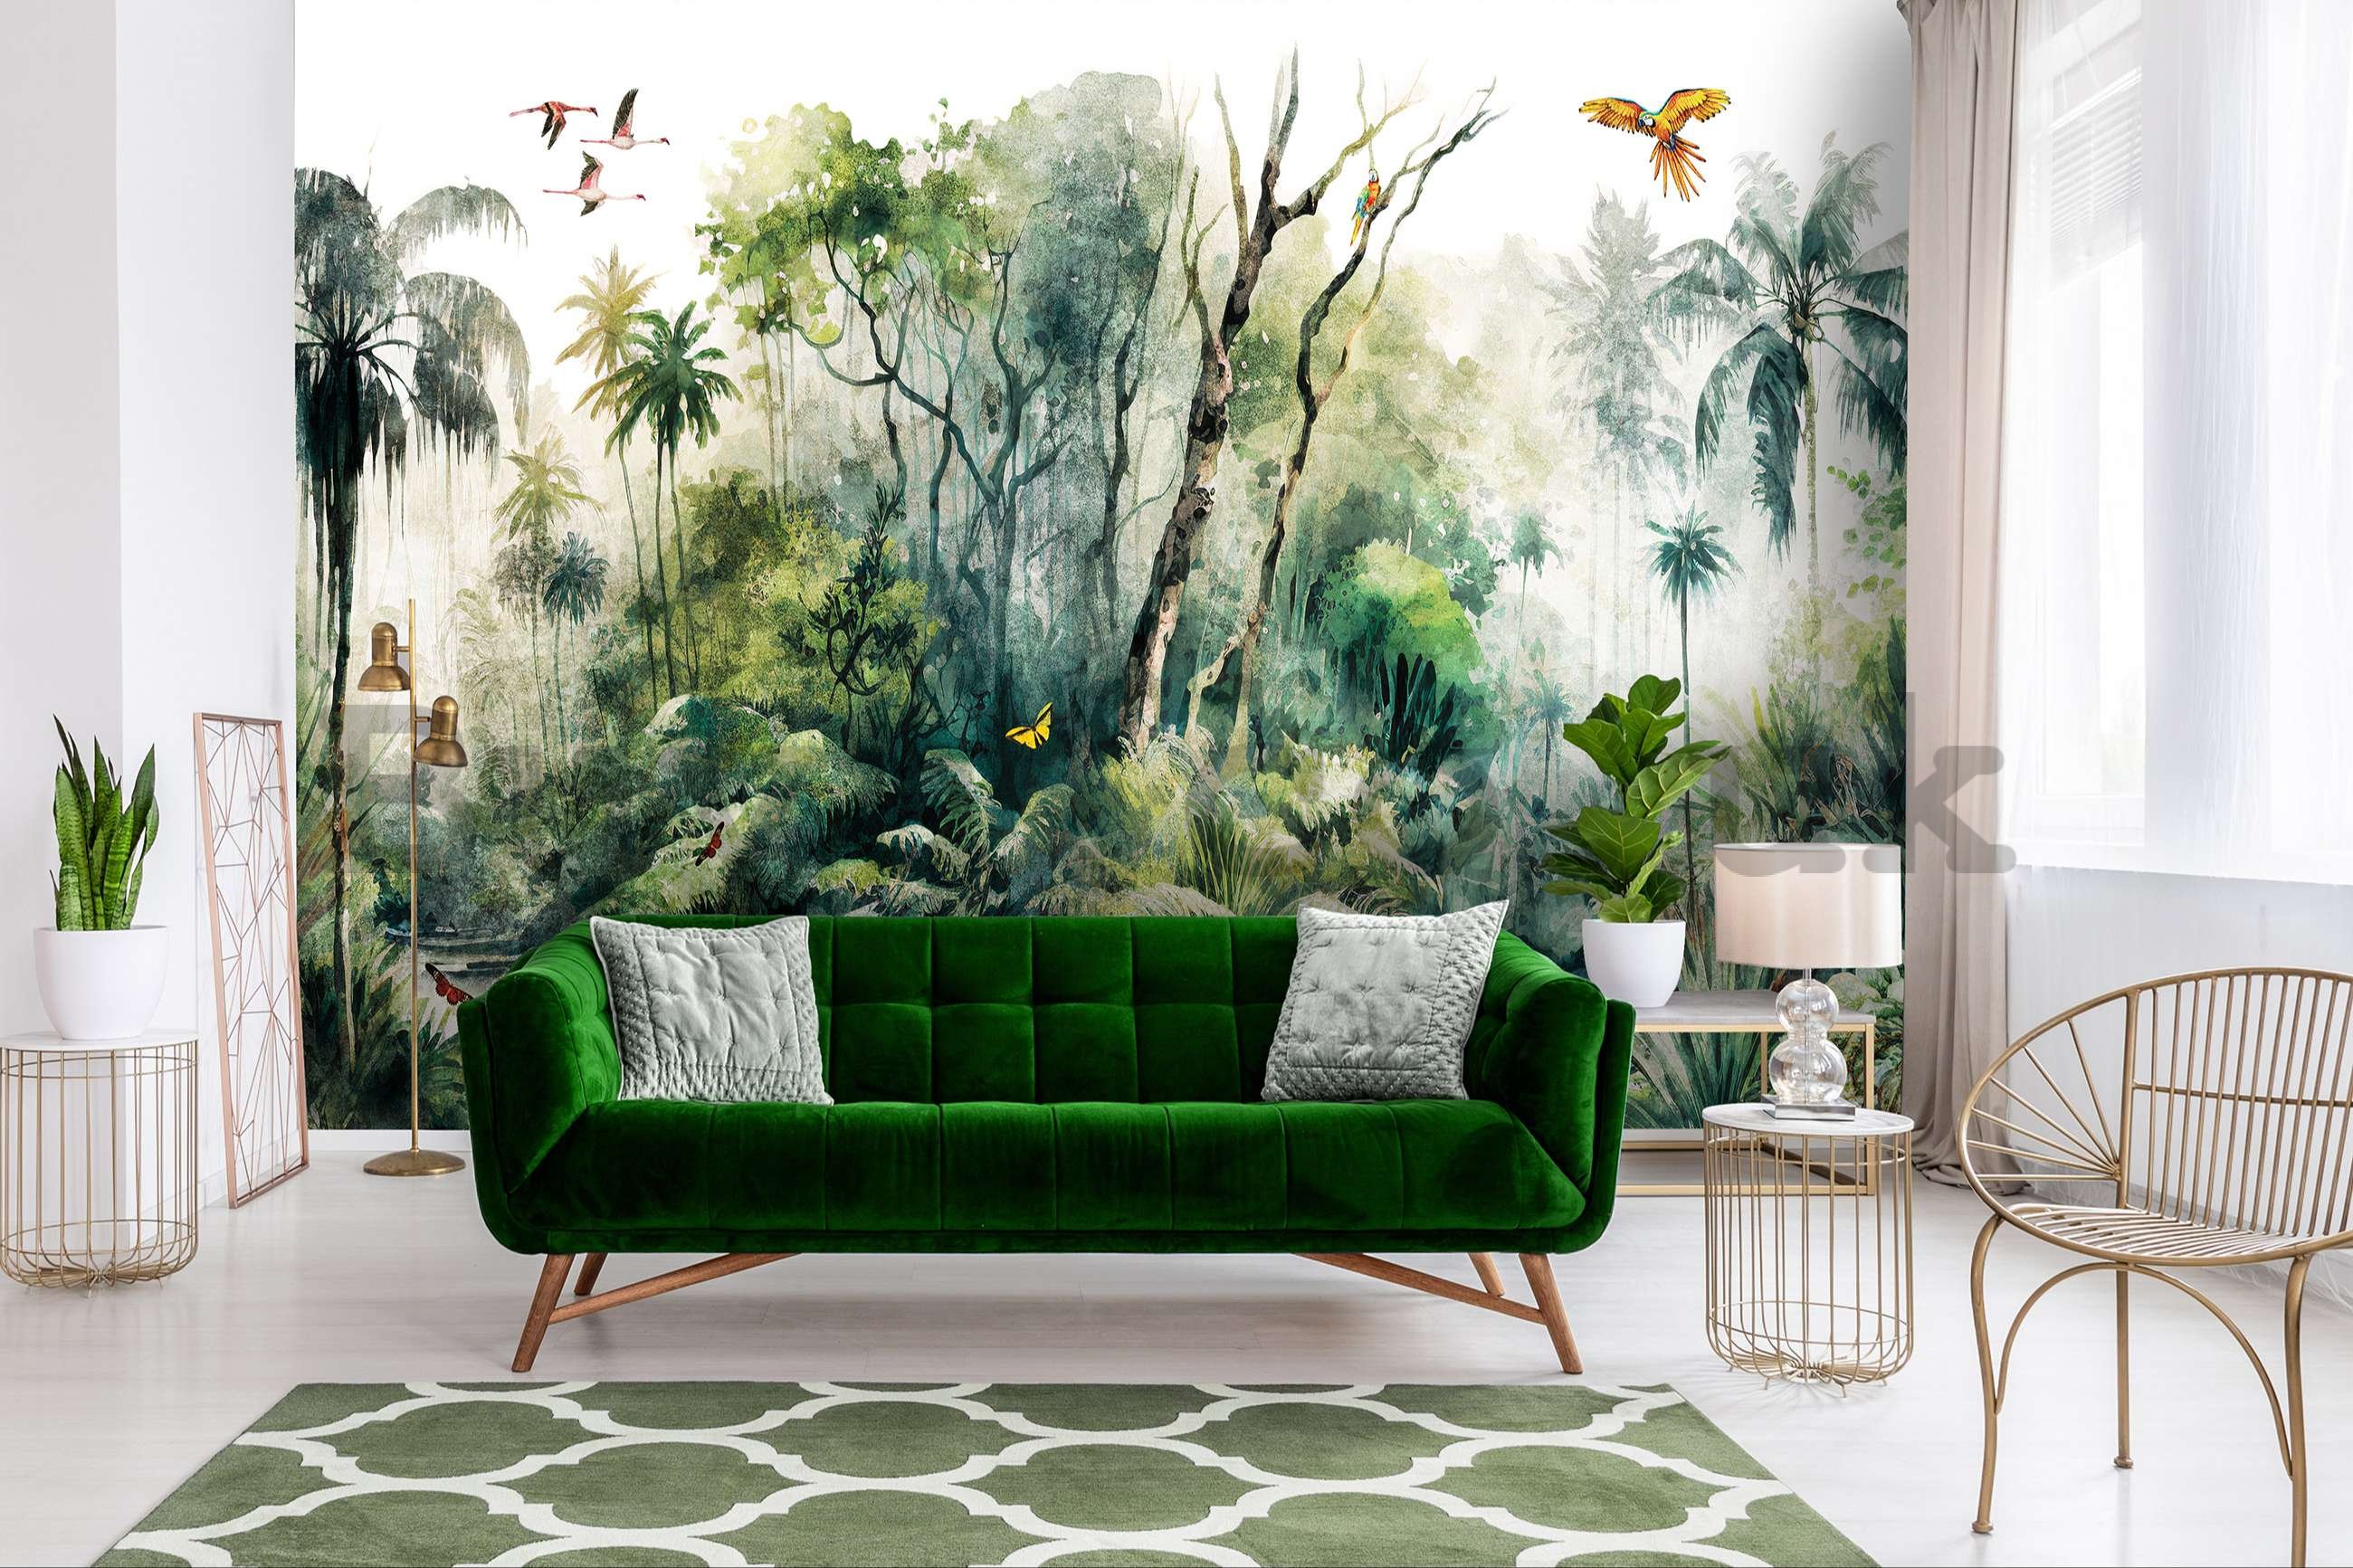 Wall mural vlies: In the rainforest (painted) - 254x184 cm